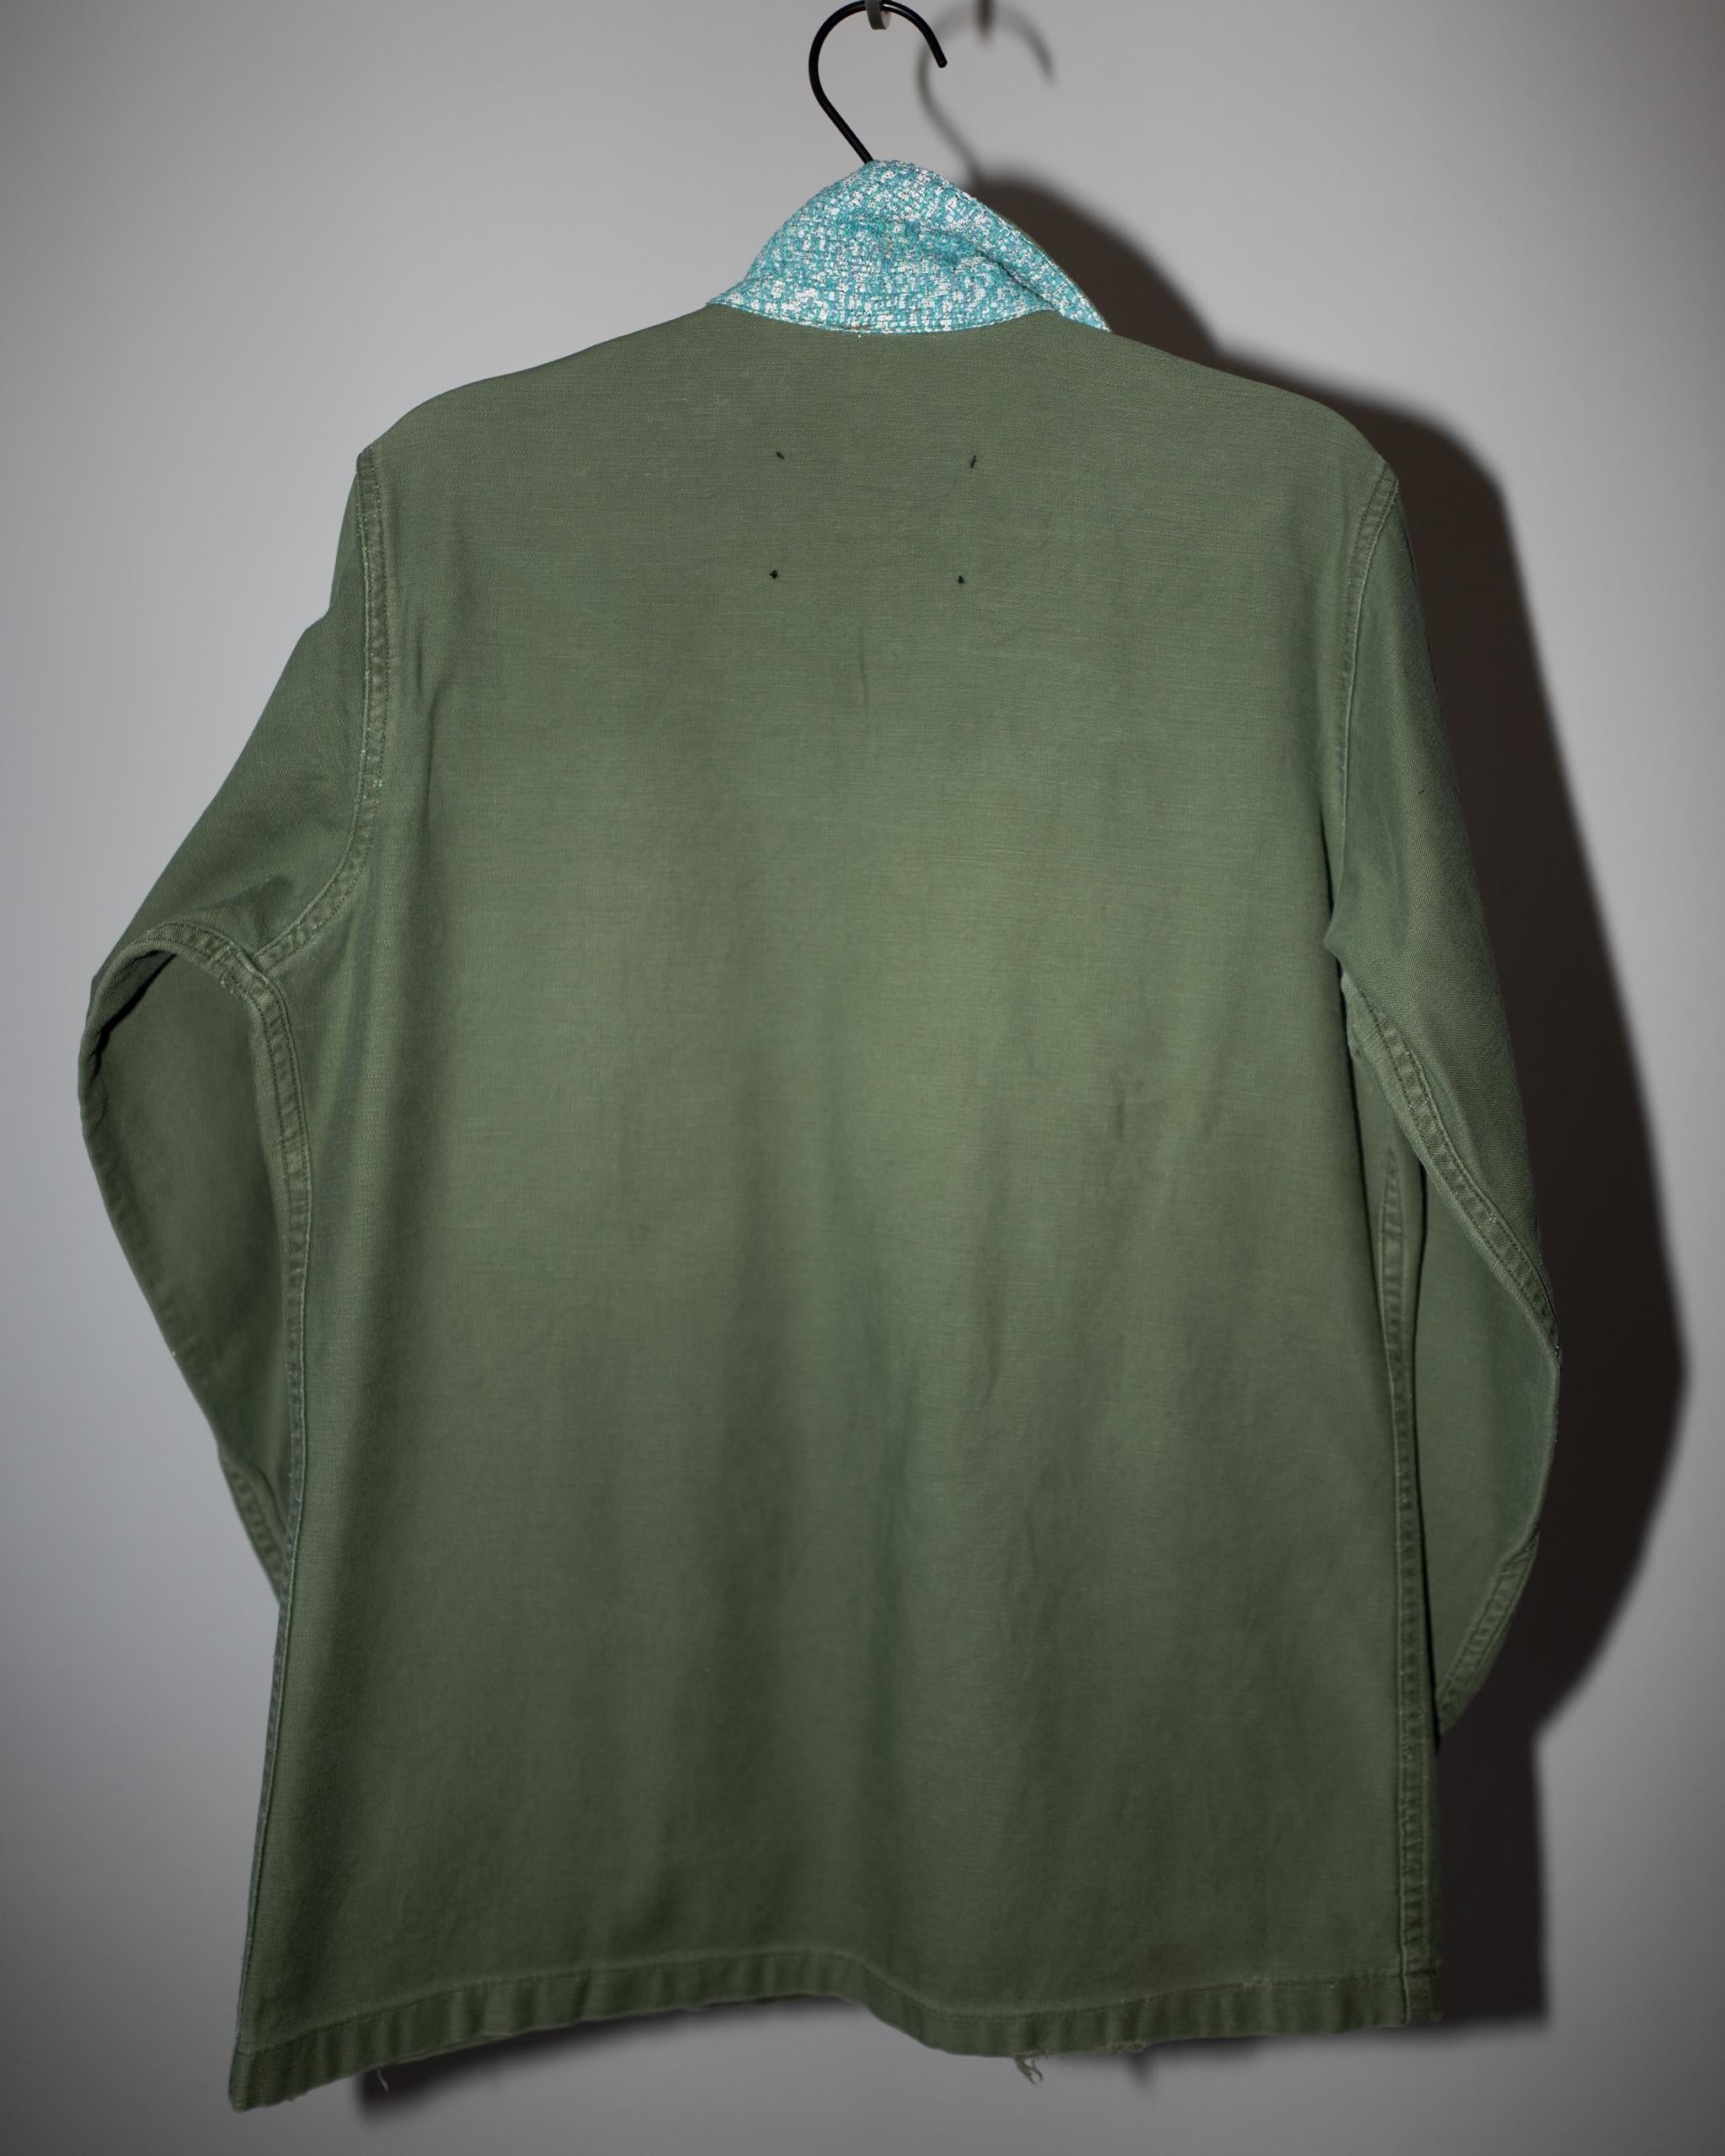 Black Lurex Tweed Pastel Green Col Vintage GreenMilitary Jacket Gold Buttons Neuf à Los Angeles, CA